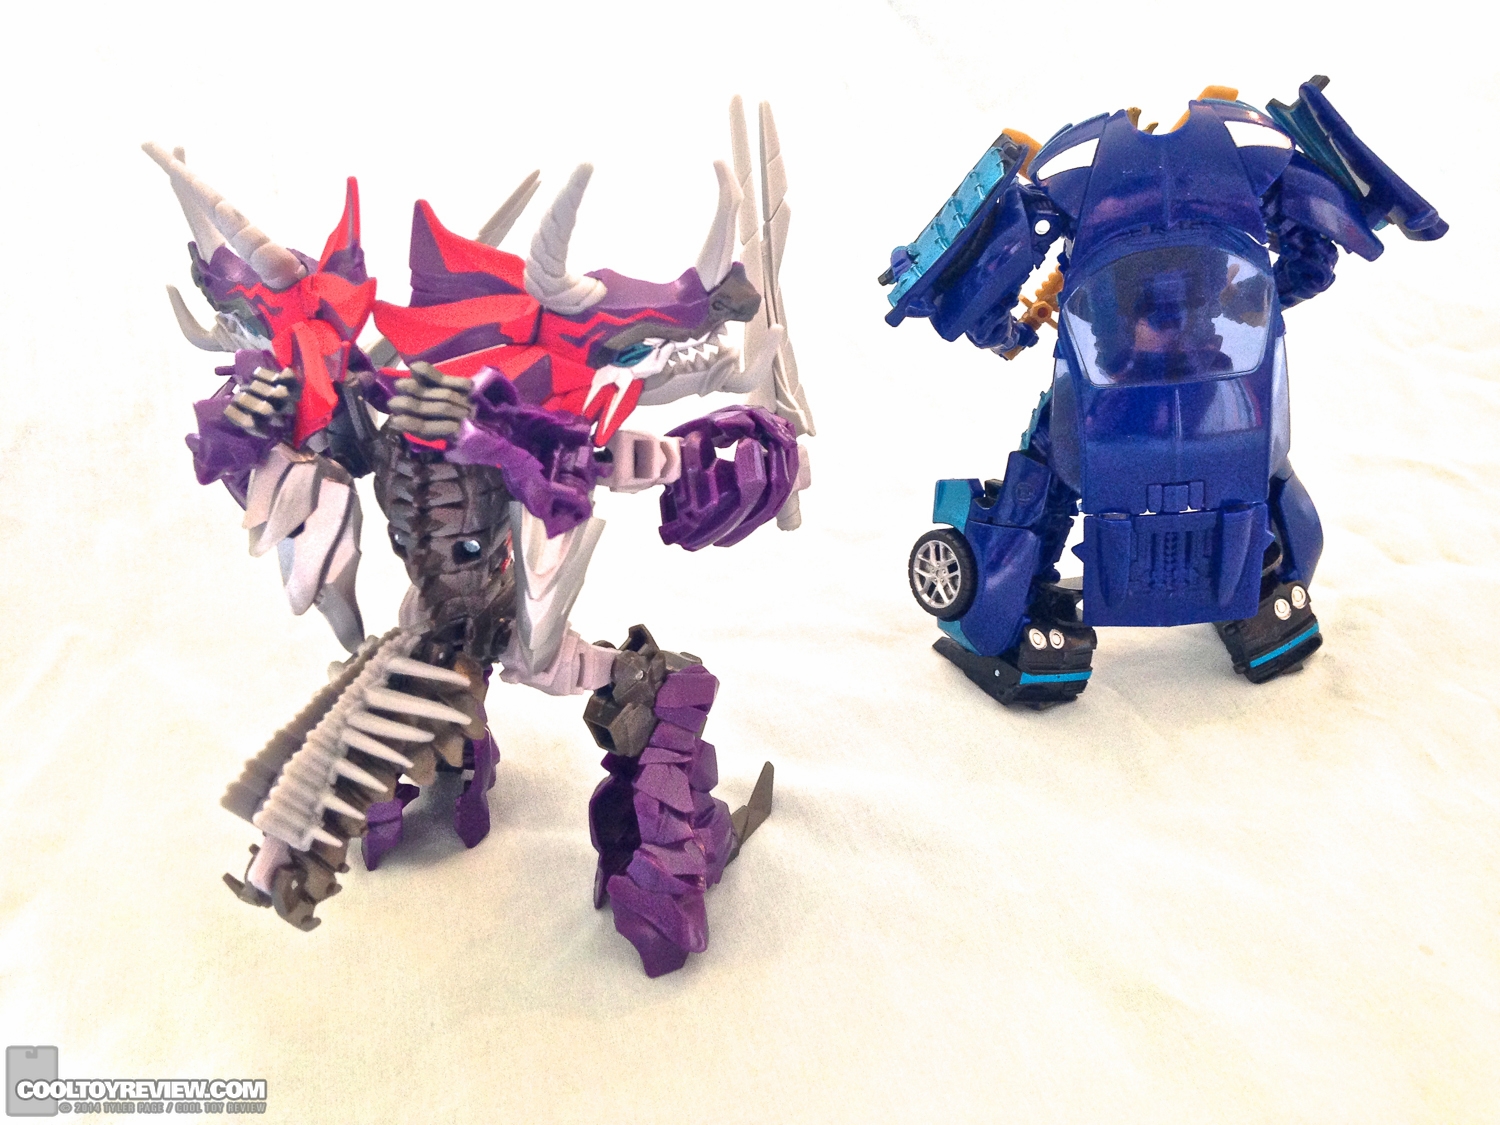 Transformers-Age-of-Extinction-Hasbro-Action-Figures-Review-011.jpg